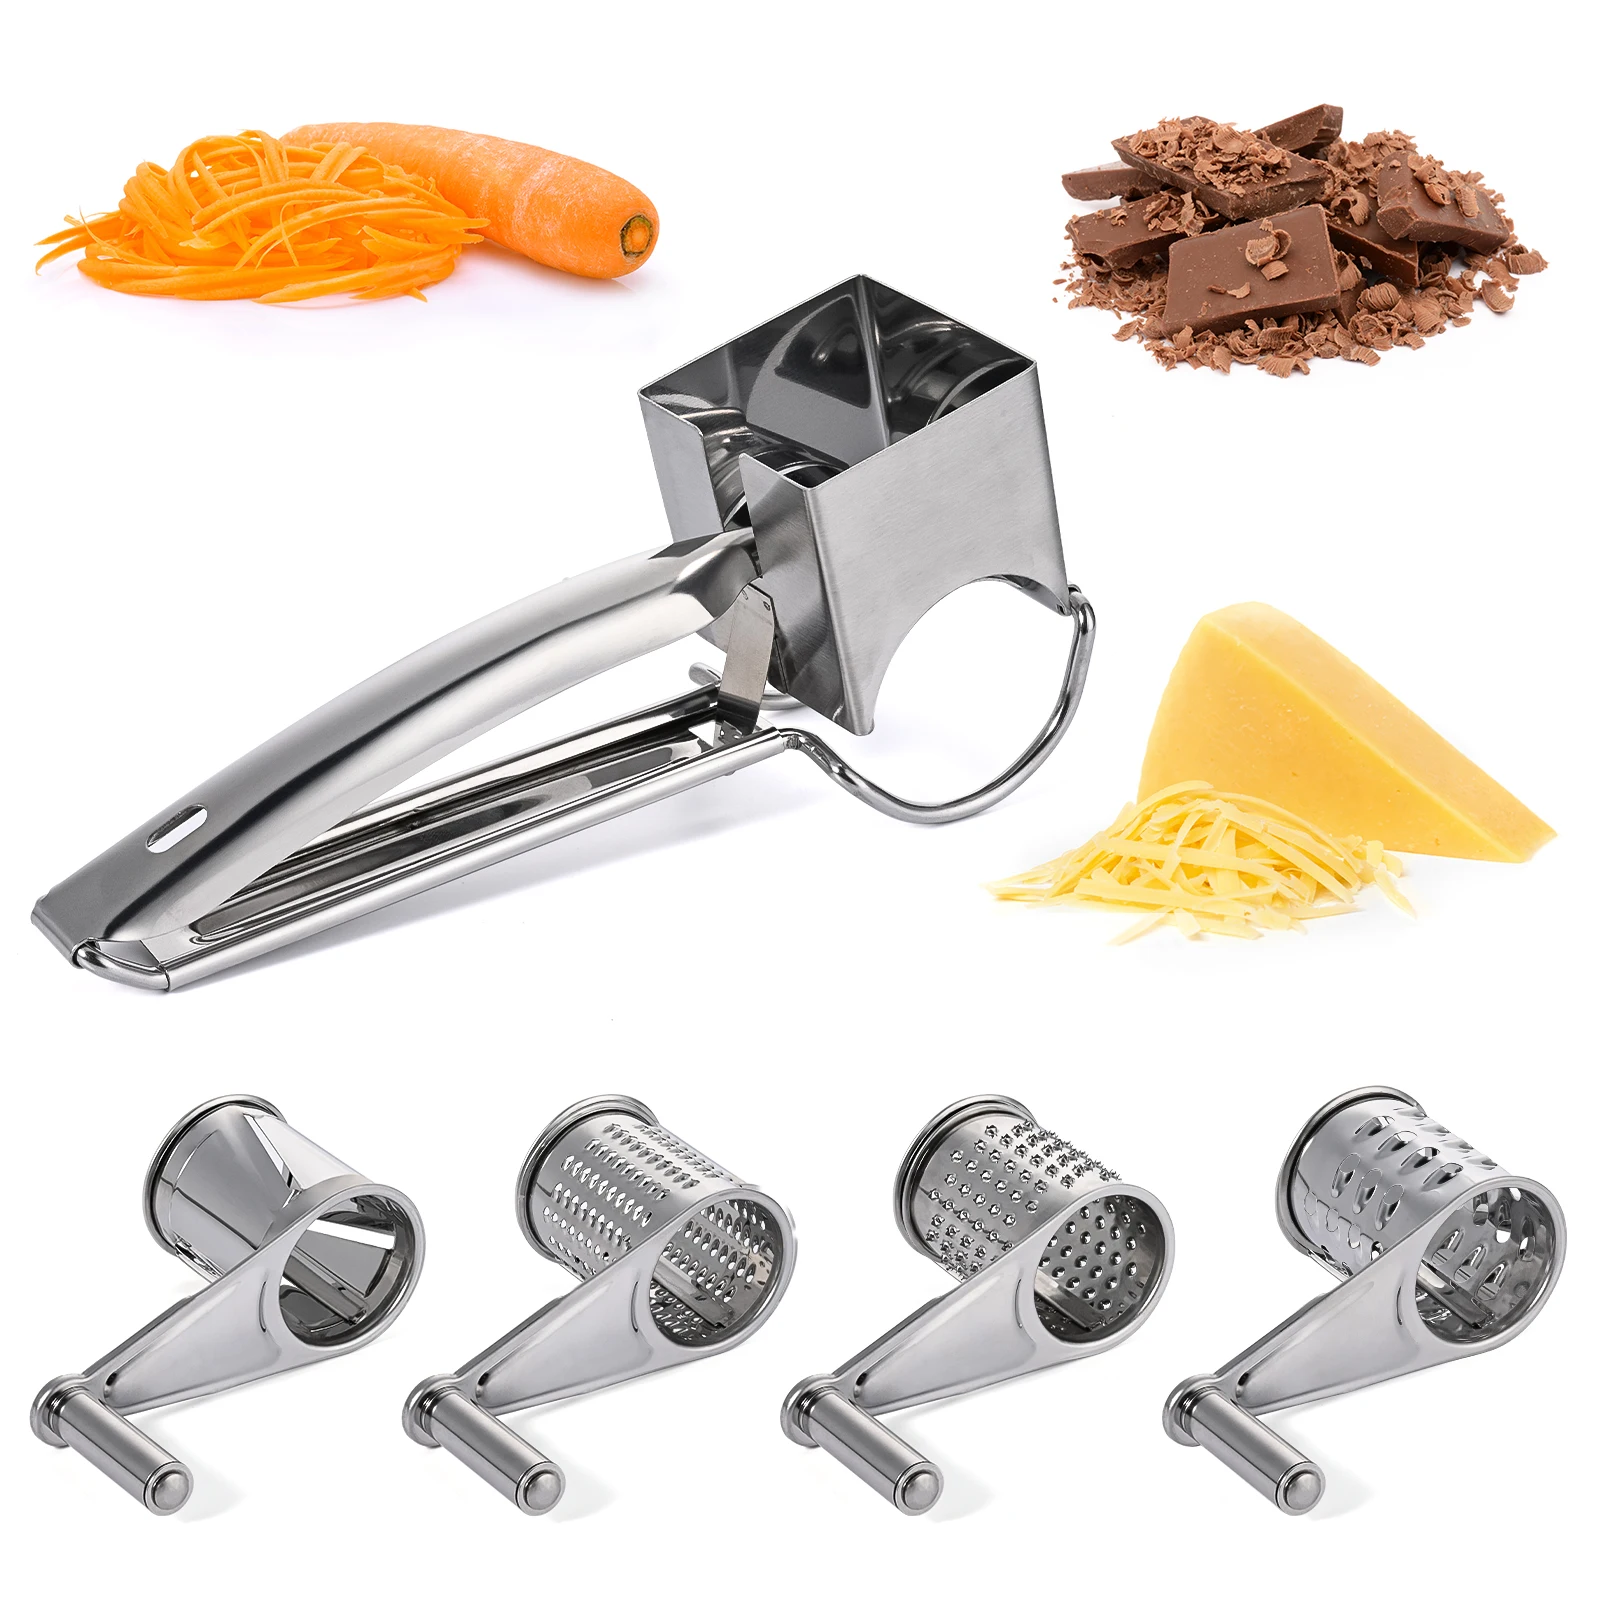 Stainless Steel Cheese Grater Hand Crank Rotary Blades Grater Kitchen Tools NEW 